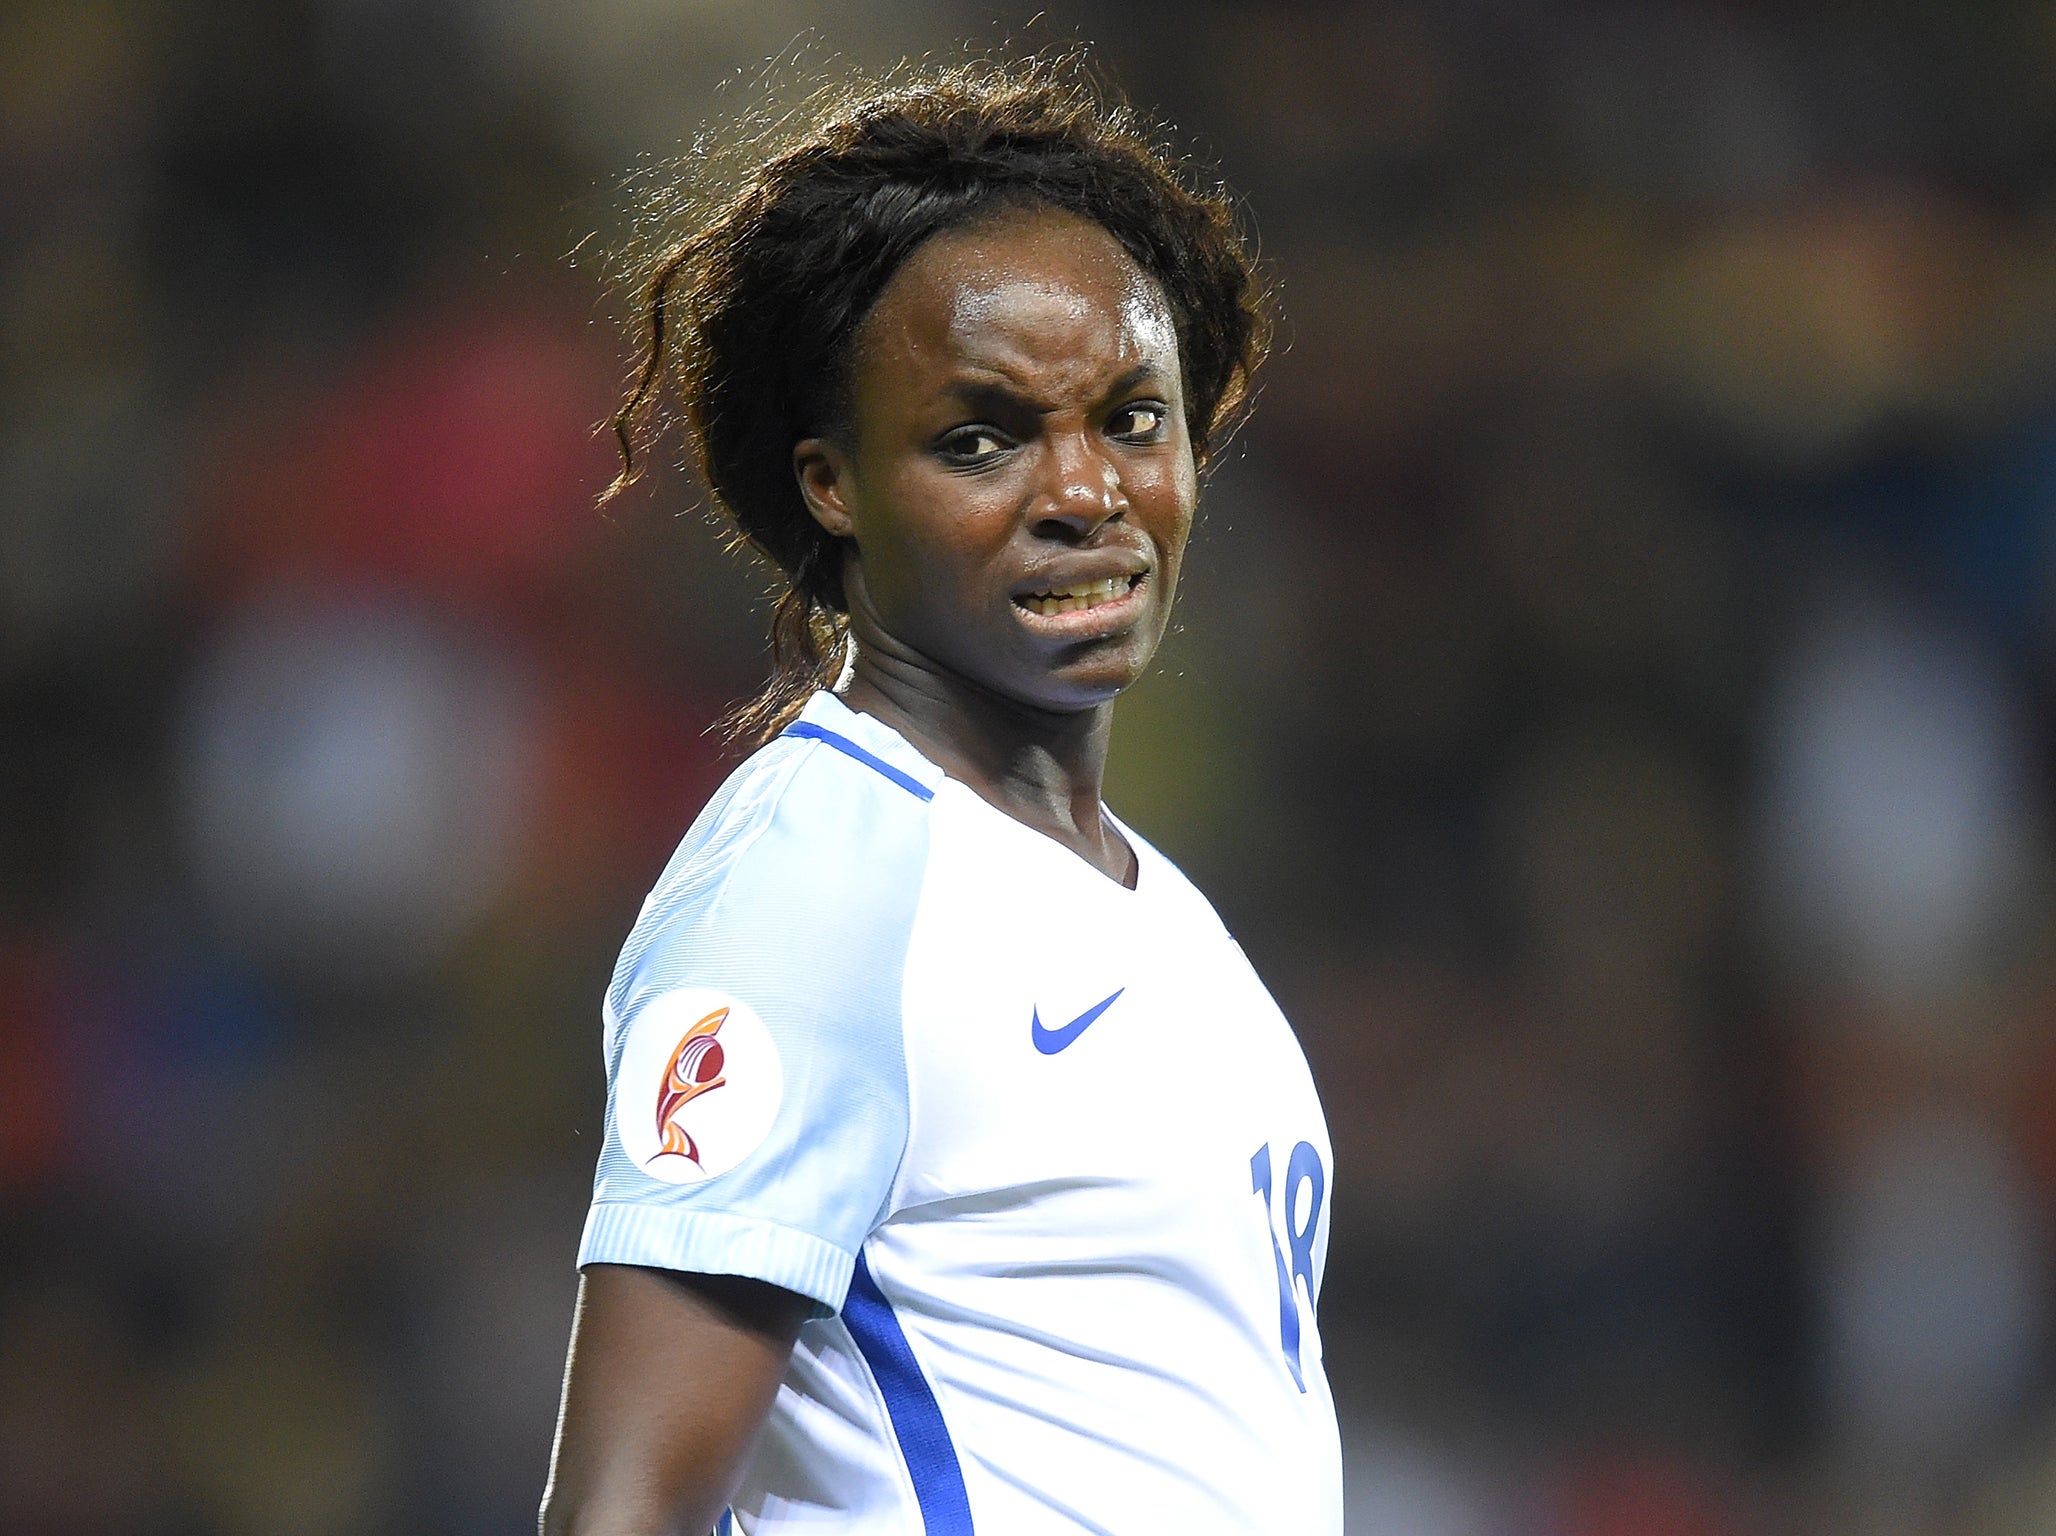 &#13;
Aluko's revelations sparked a scandal in the women's game?&#13;